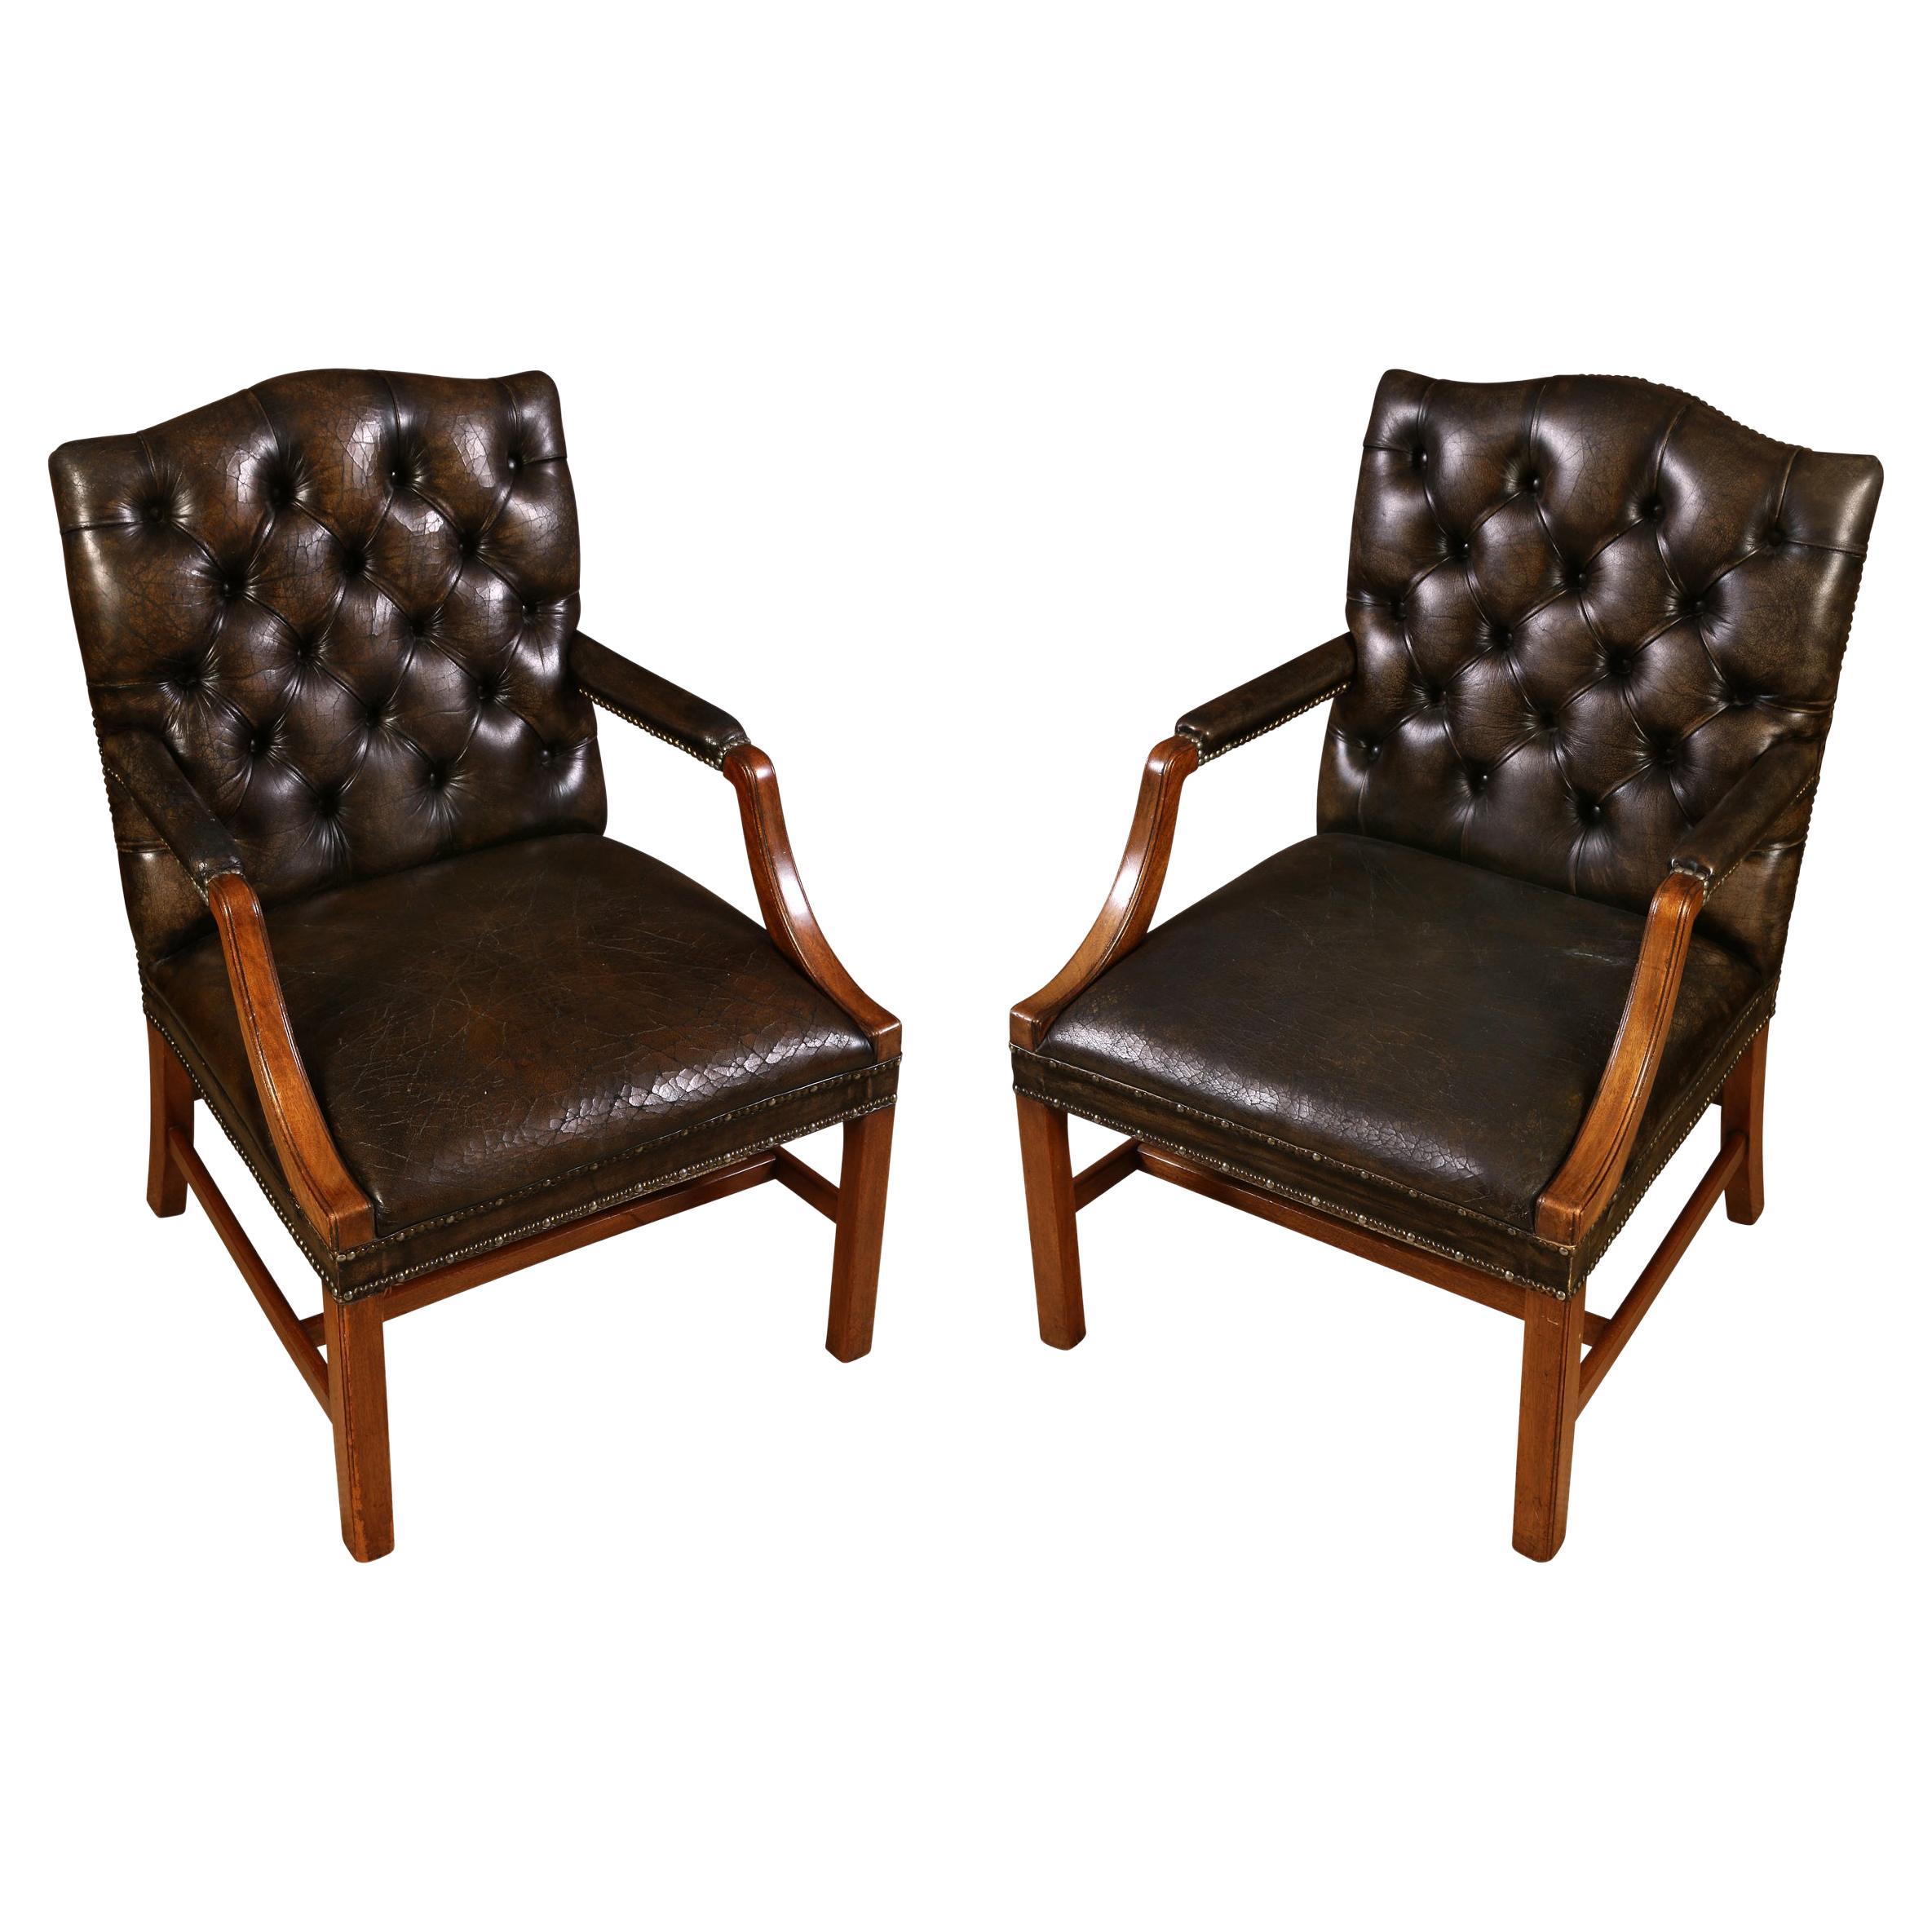 Pair of Vintage Georgian Patinated Leather Tufted Arm Chairs For Sale